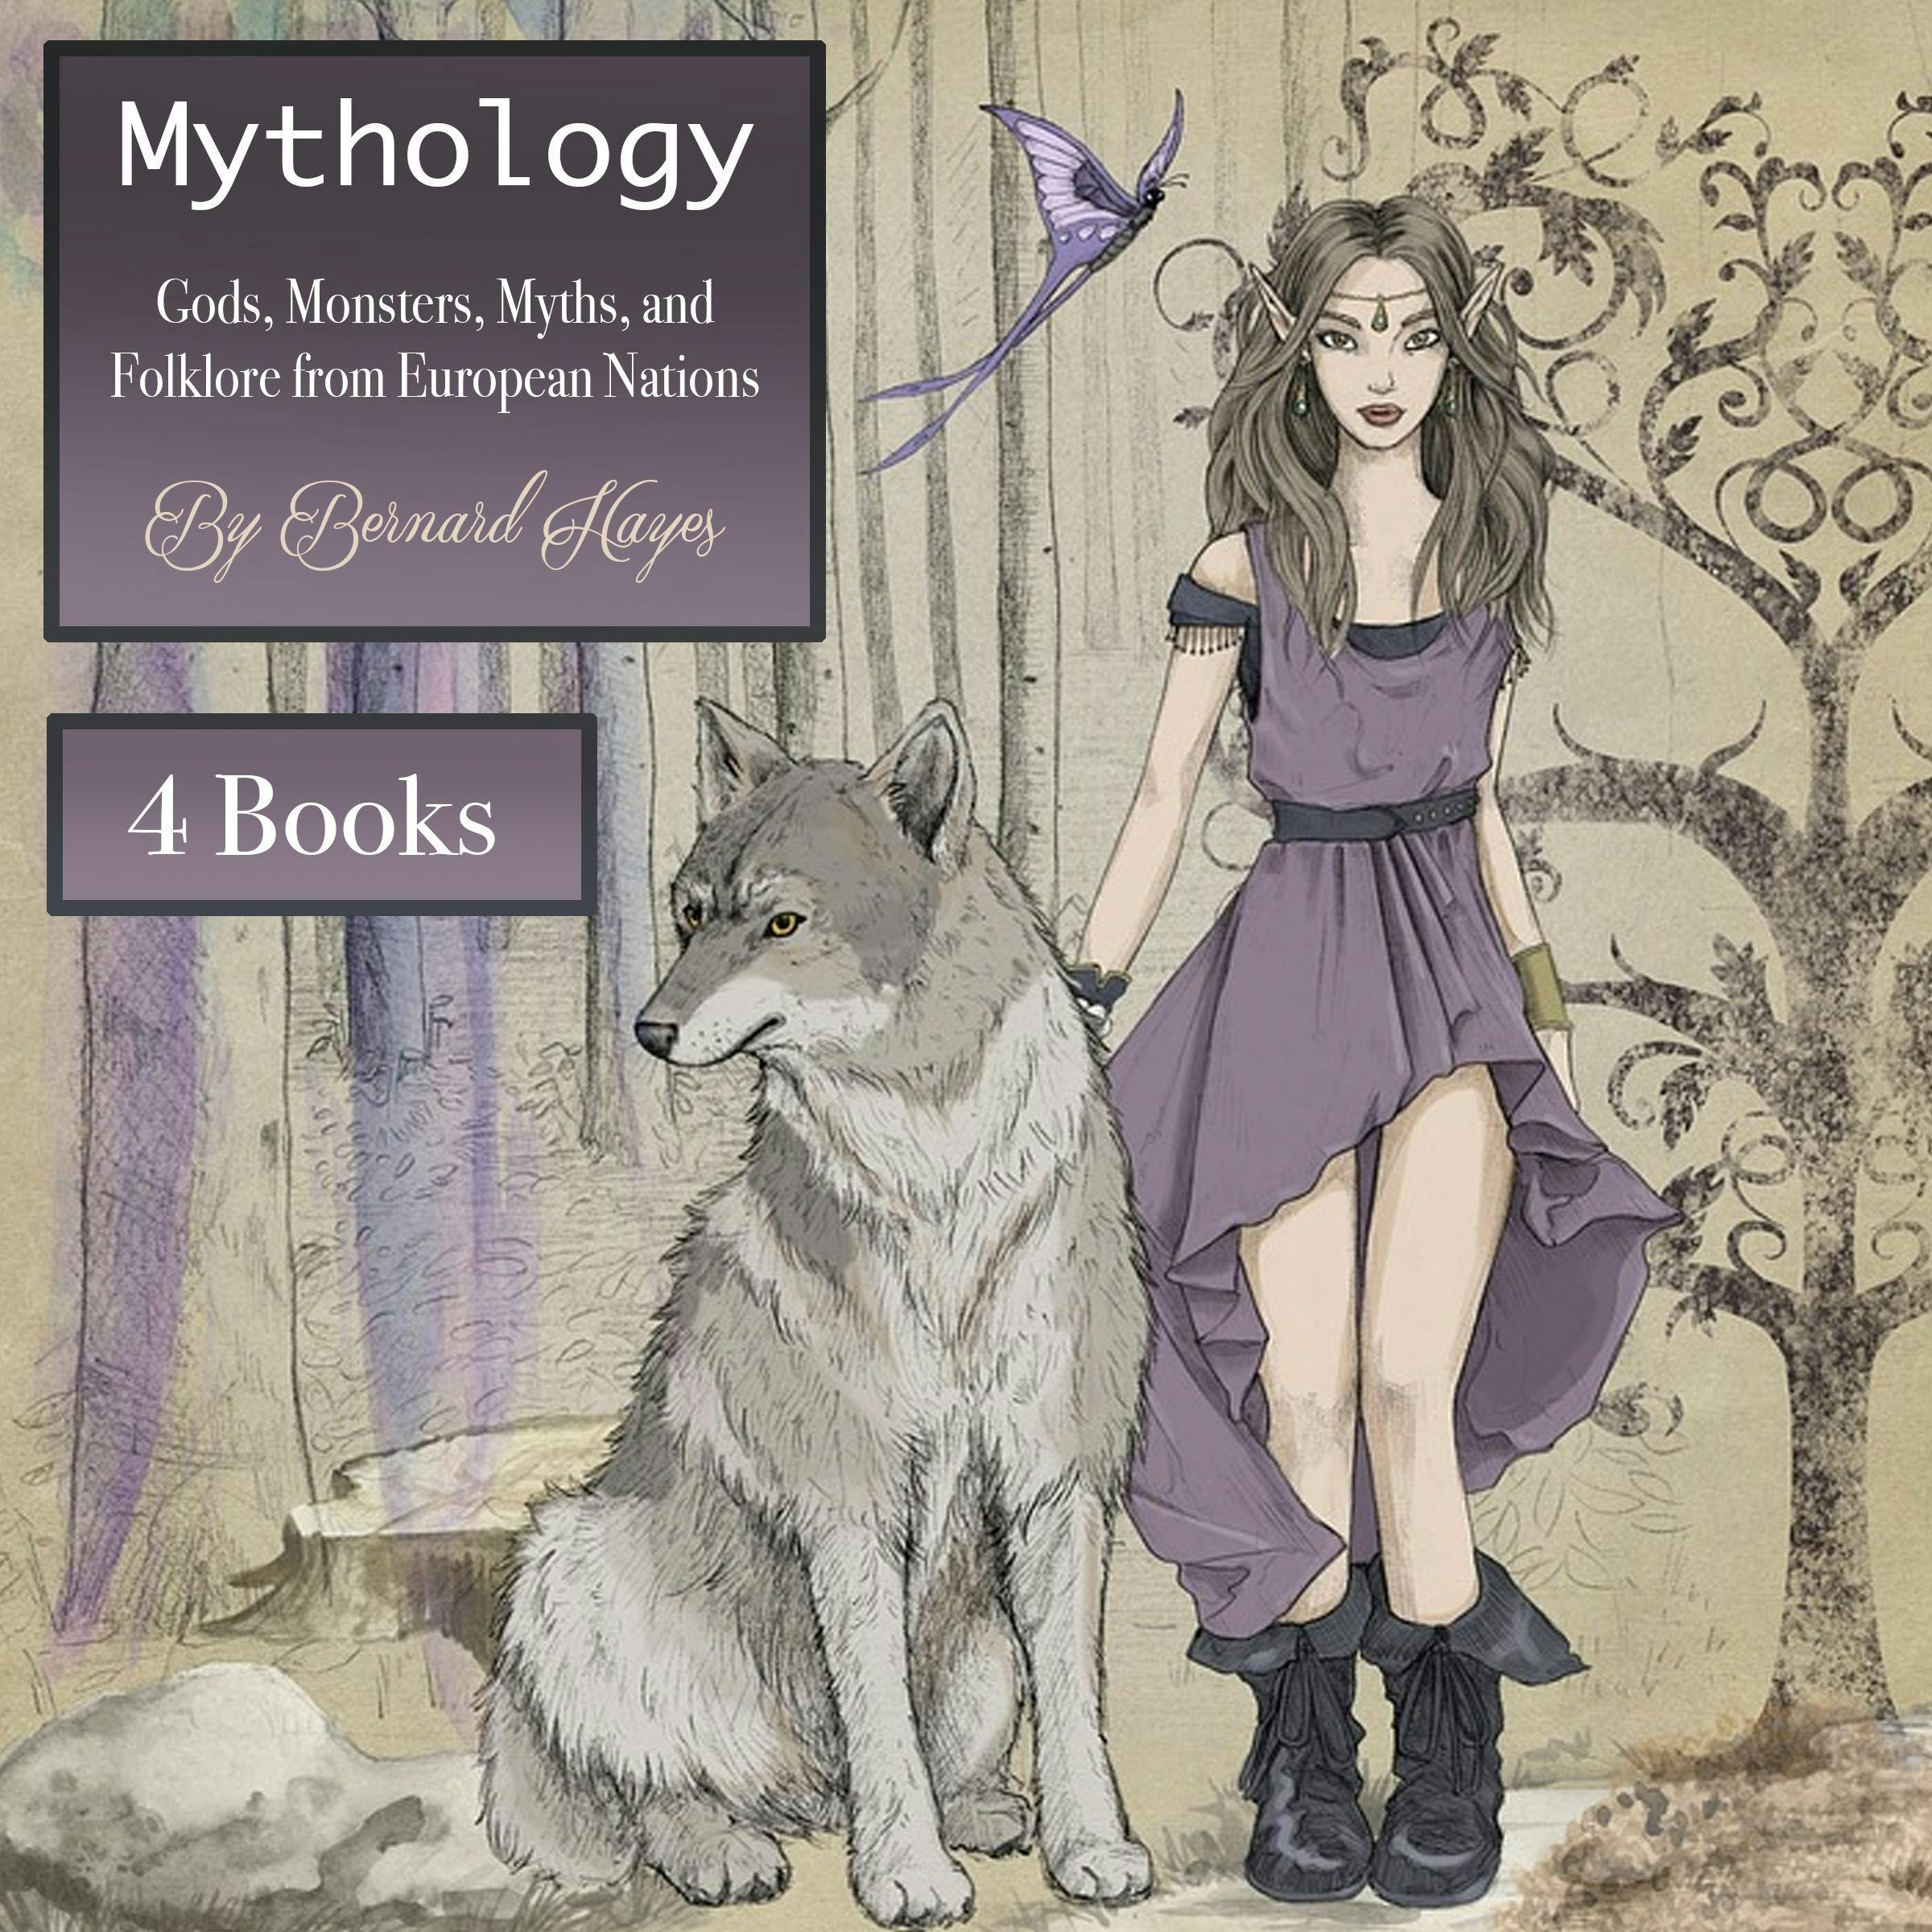 Mythology: Gods, Monsters, Myths, and Folklore from European Nations - Bernard Hayes